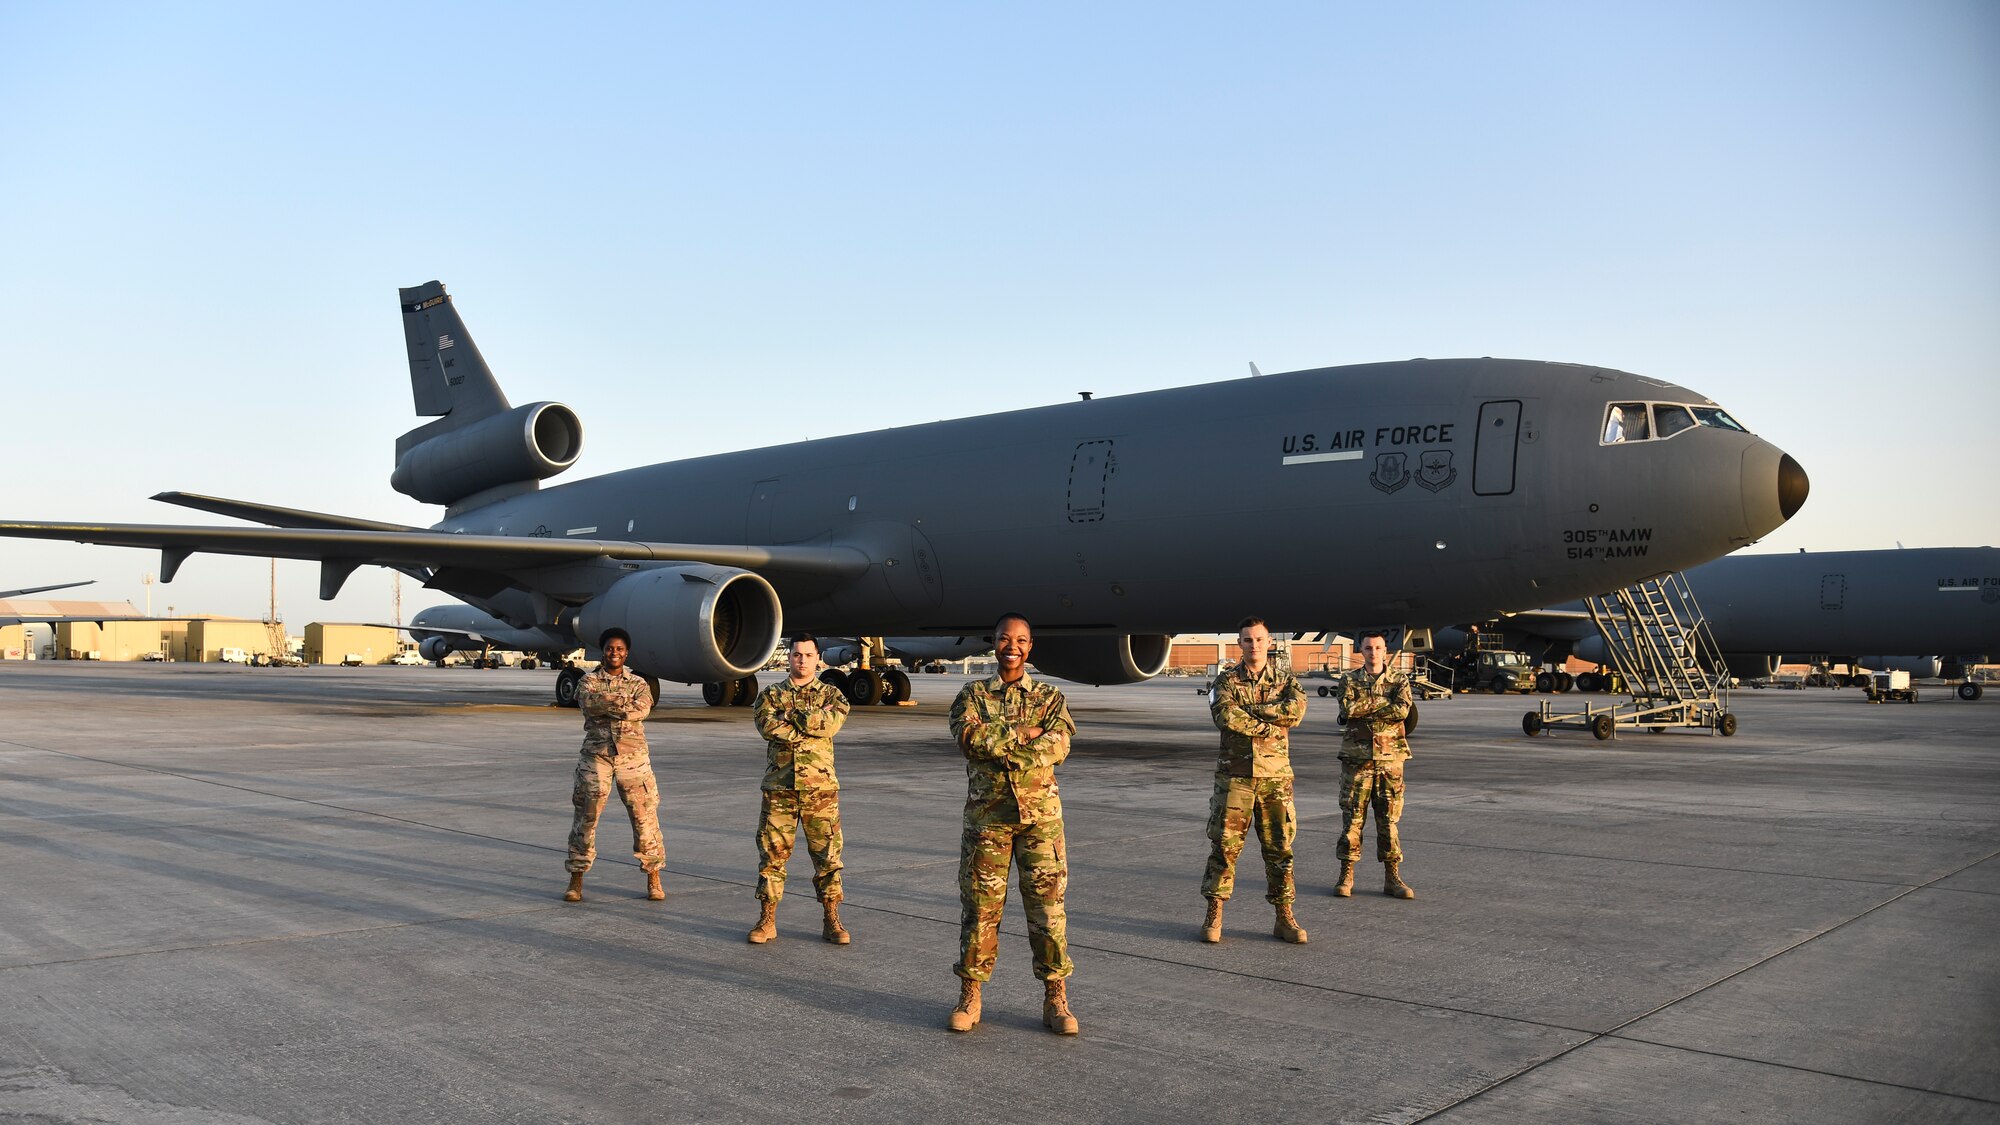 The 380th Expeditionary Maintenance Group maintenance operations center poses in front of KC-10 Extender at Al Dhafra Air Base, United Arab Emirates, Dec. 9, 2018. The 380th EMXG MOC support approximately 520 personnel and 24 aircraft including an additional influx of transient aircraft. (U.S. Air Force photo by Senior Airman Mya M. Crosby)